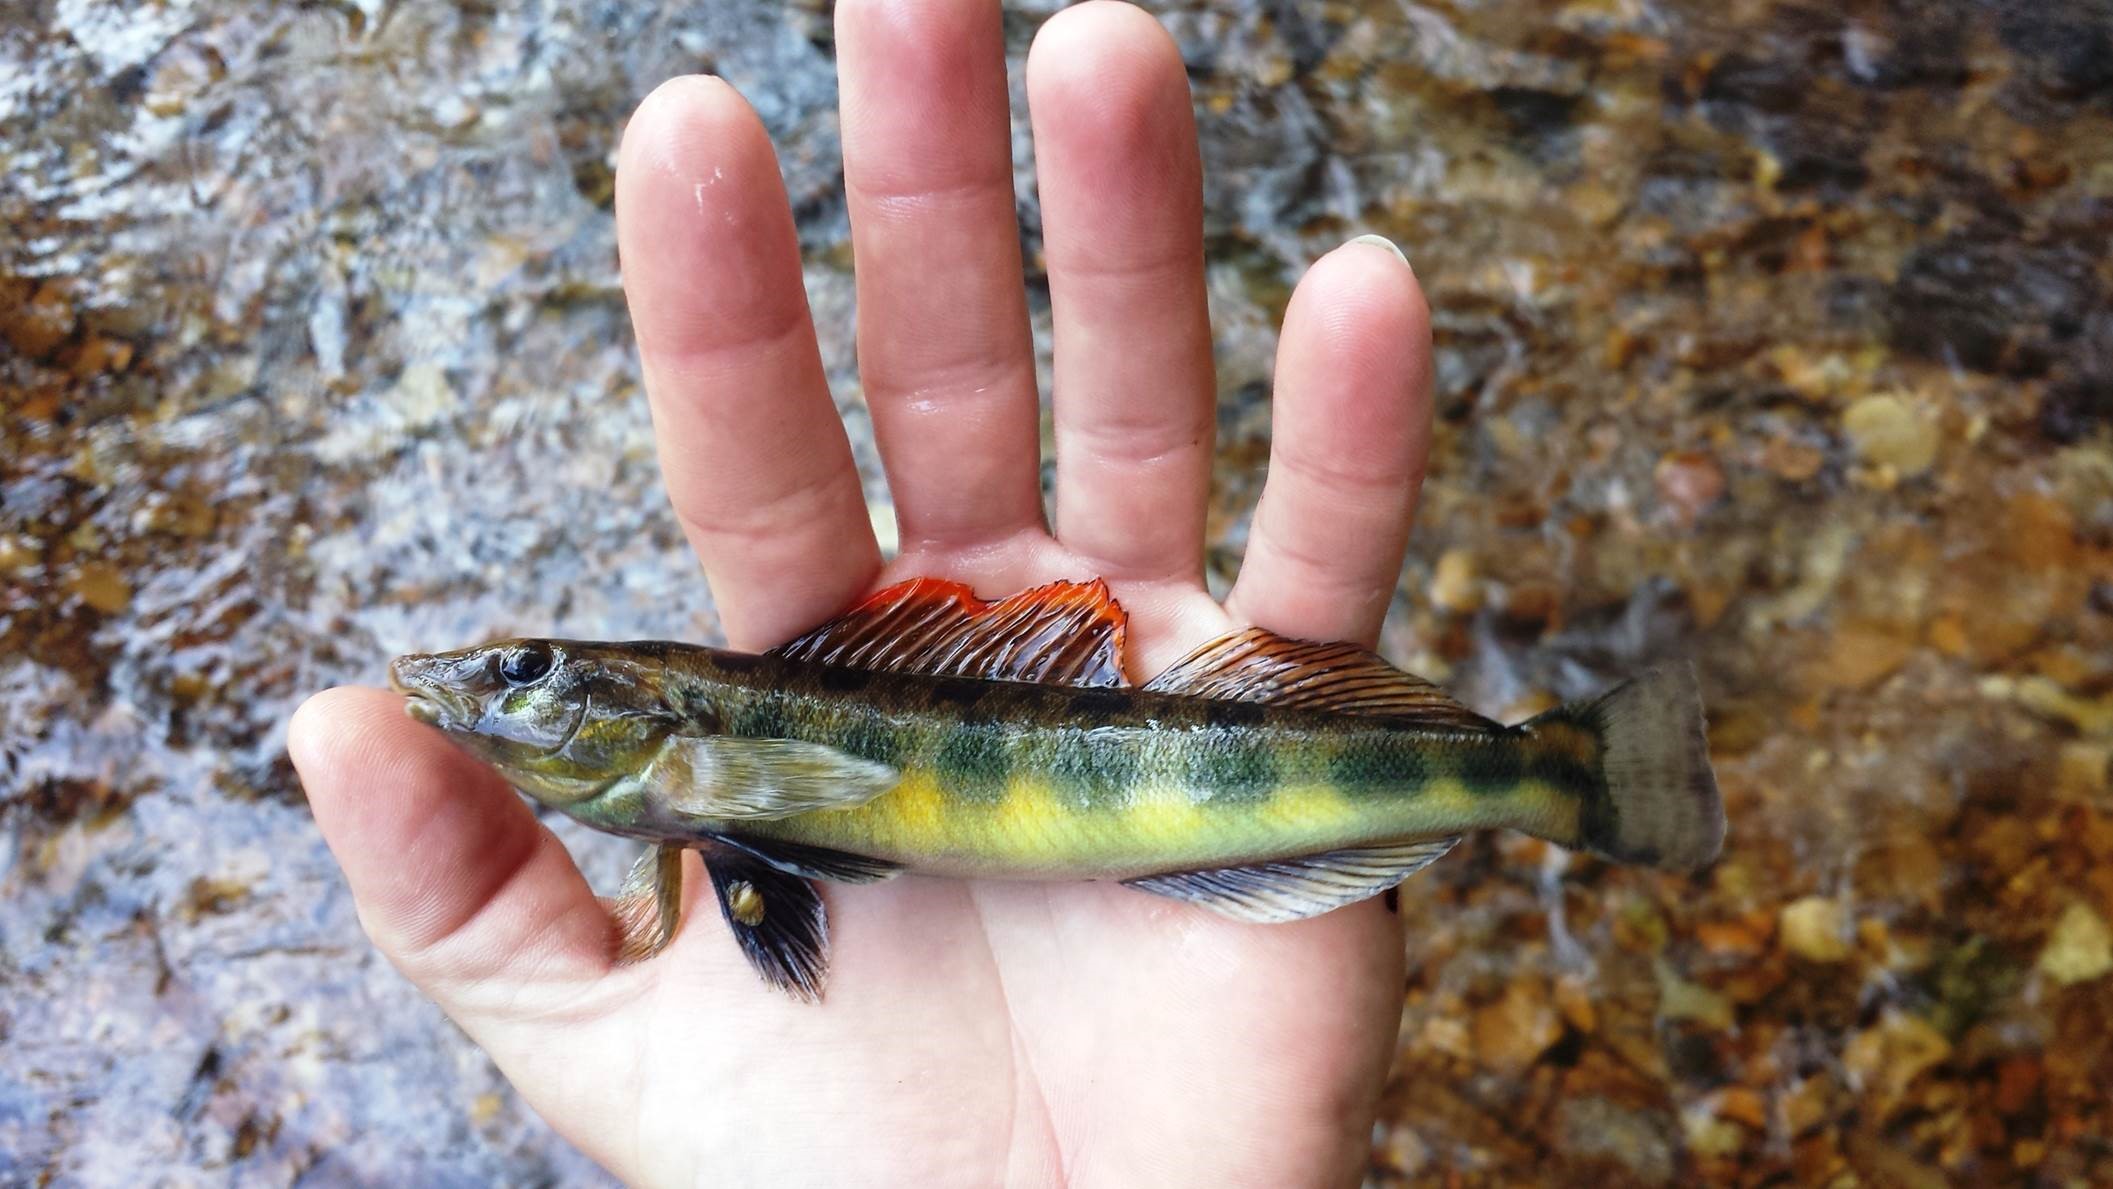 New fish discovered in Tennessee River Watershed